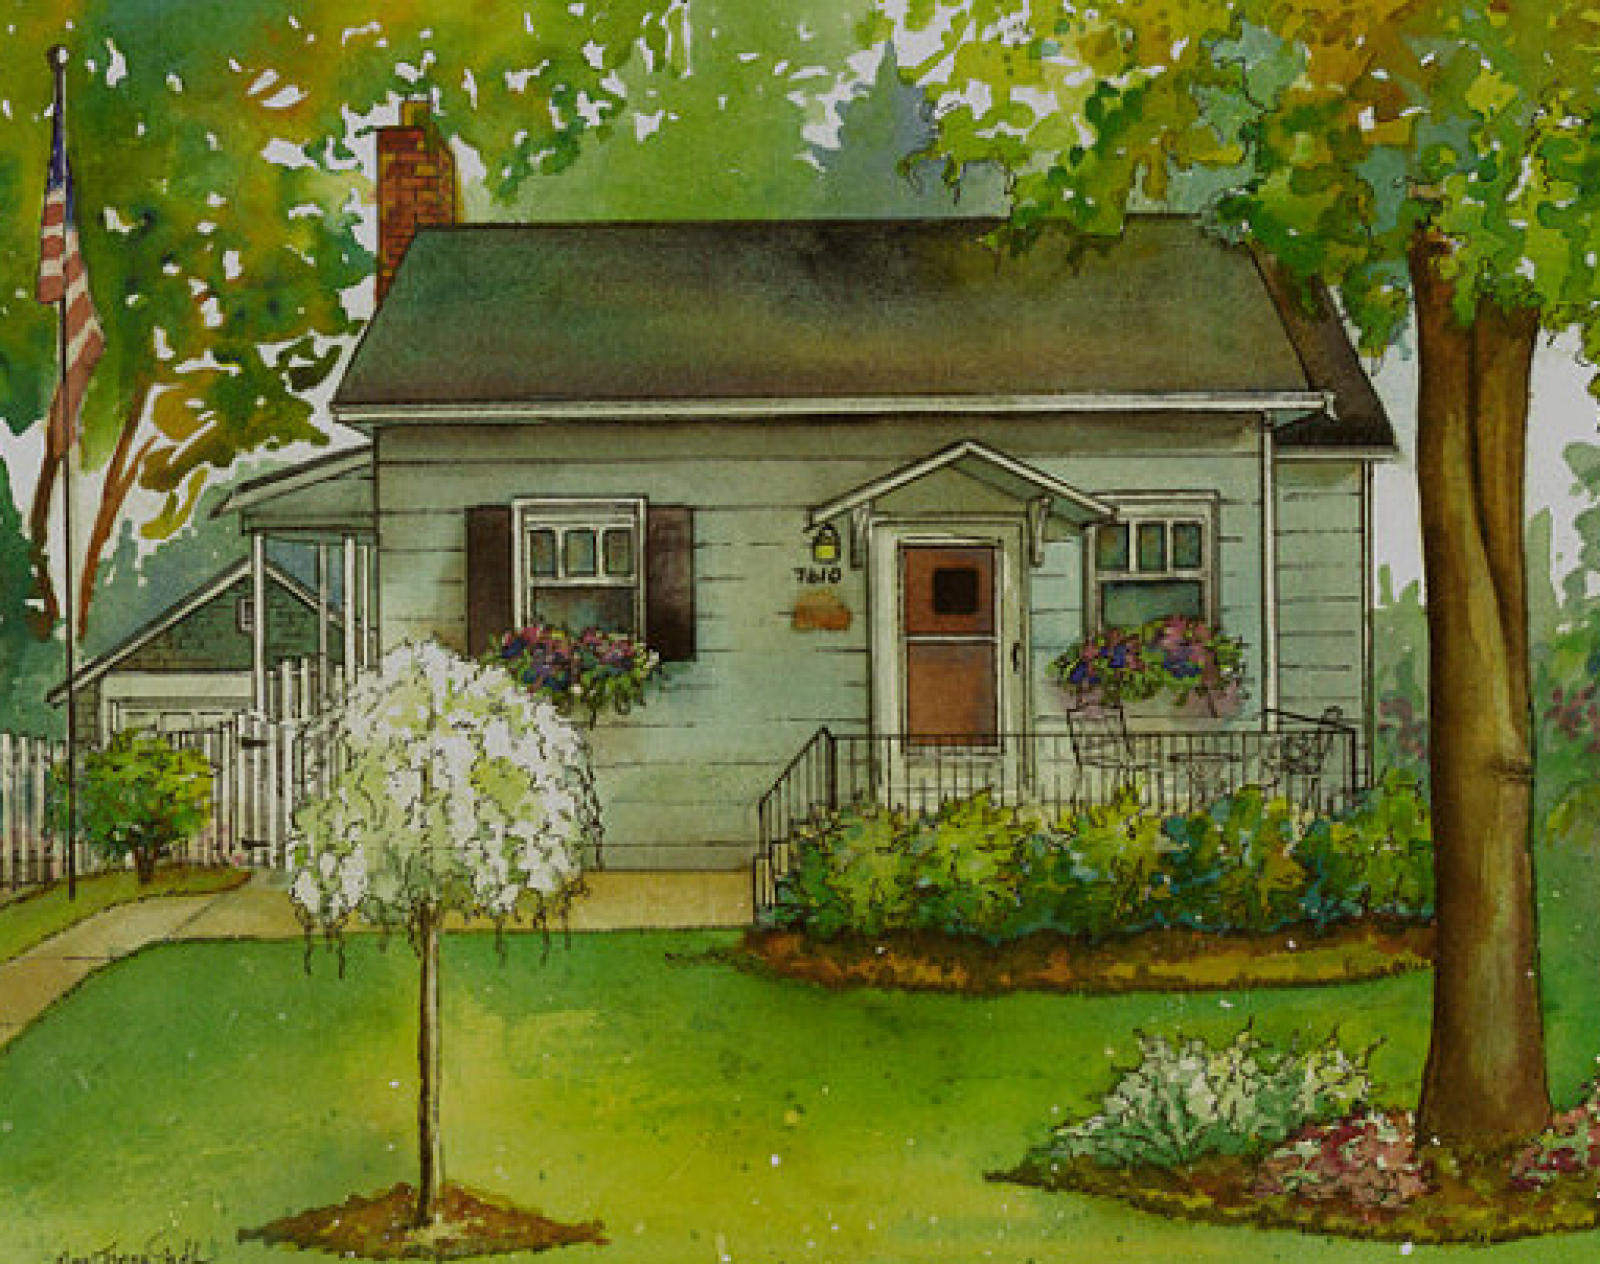 Home portrait in watercolor and ink  Home Portraits by Mary Frances Smith